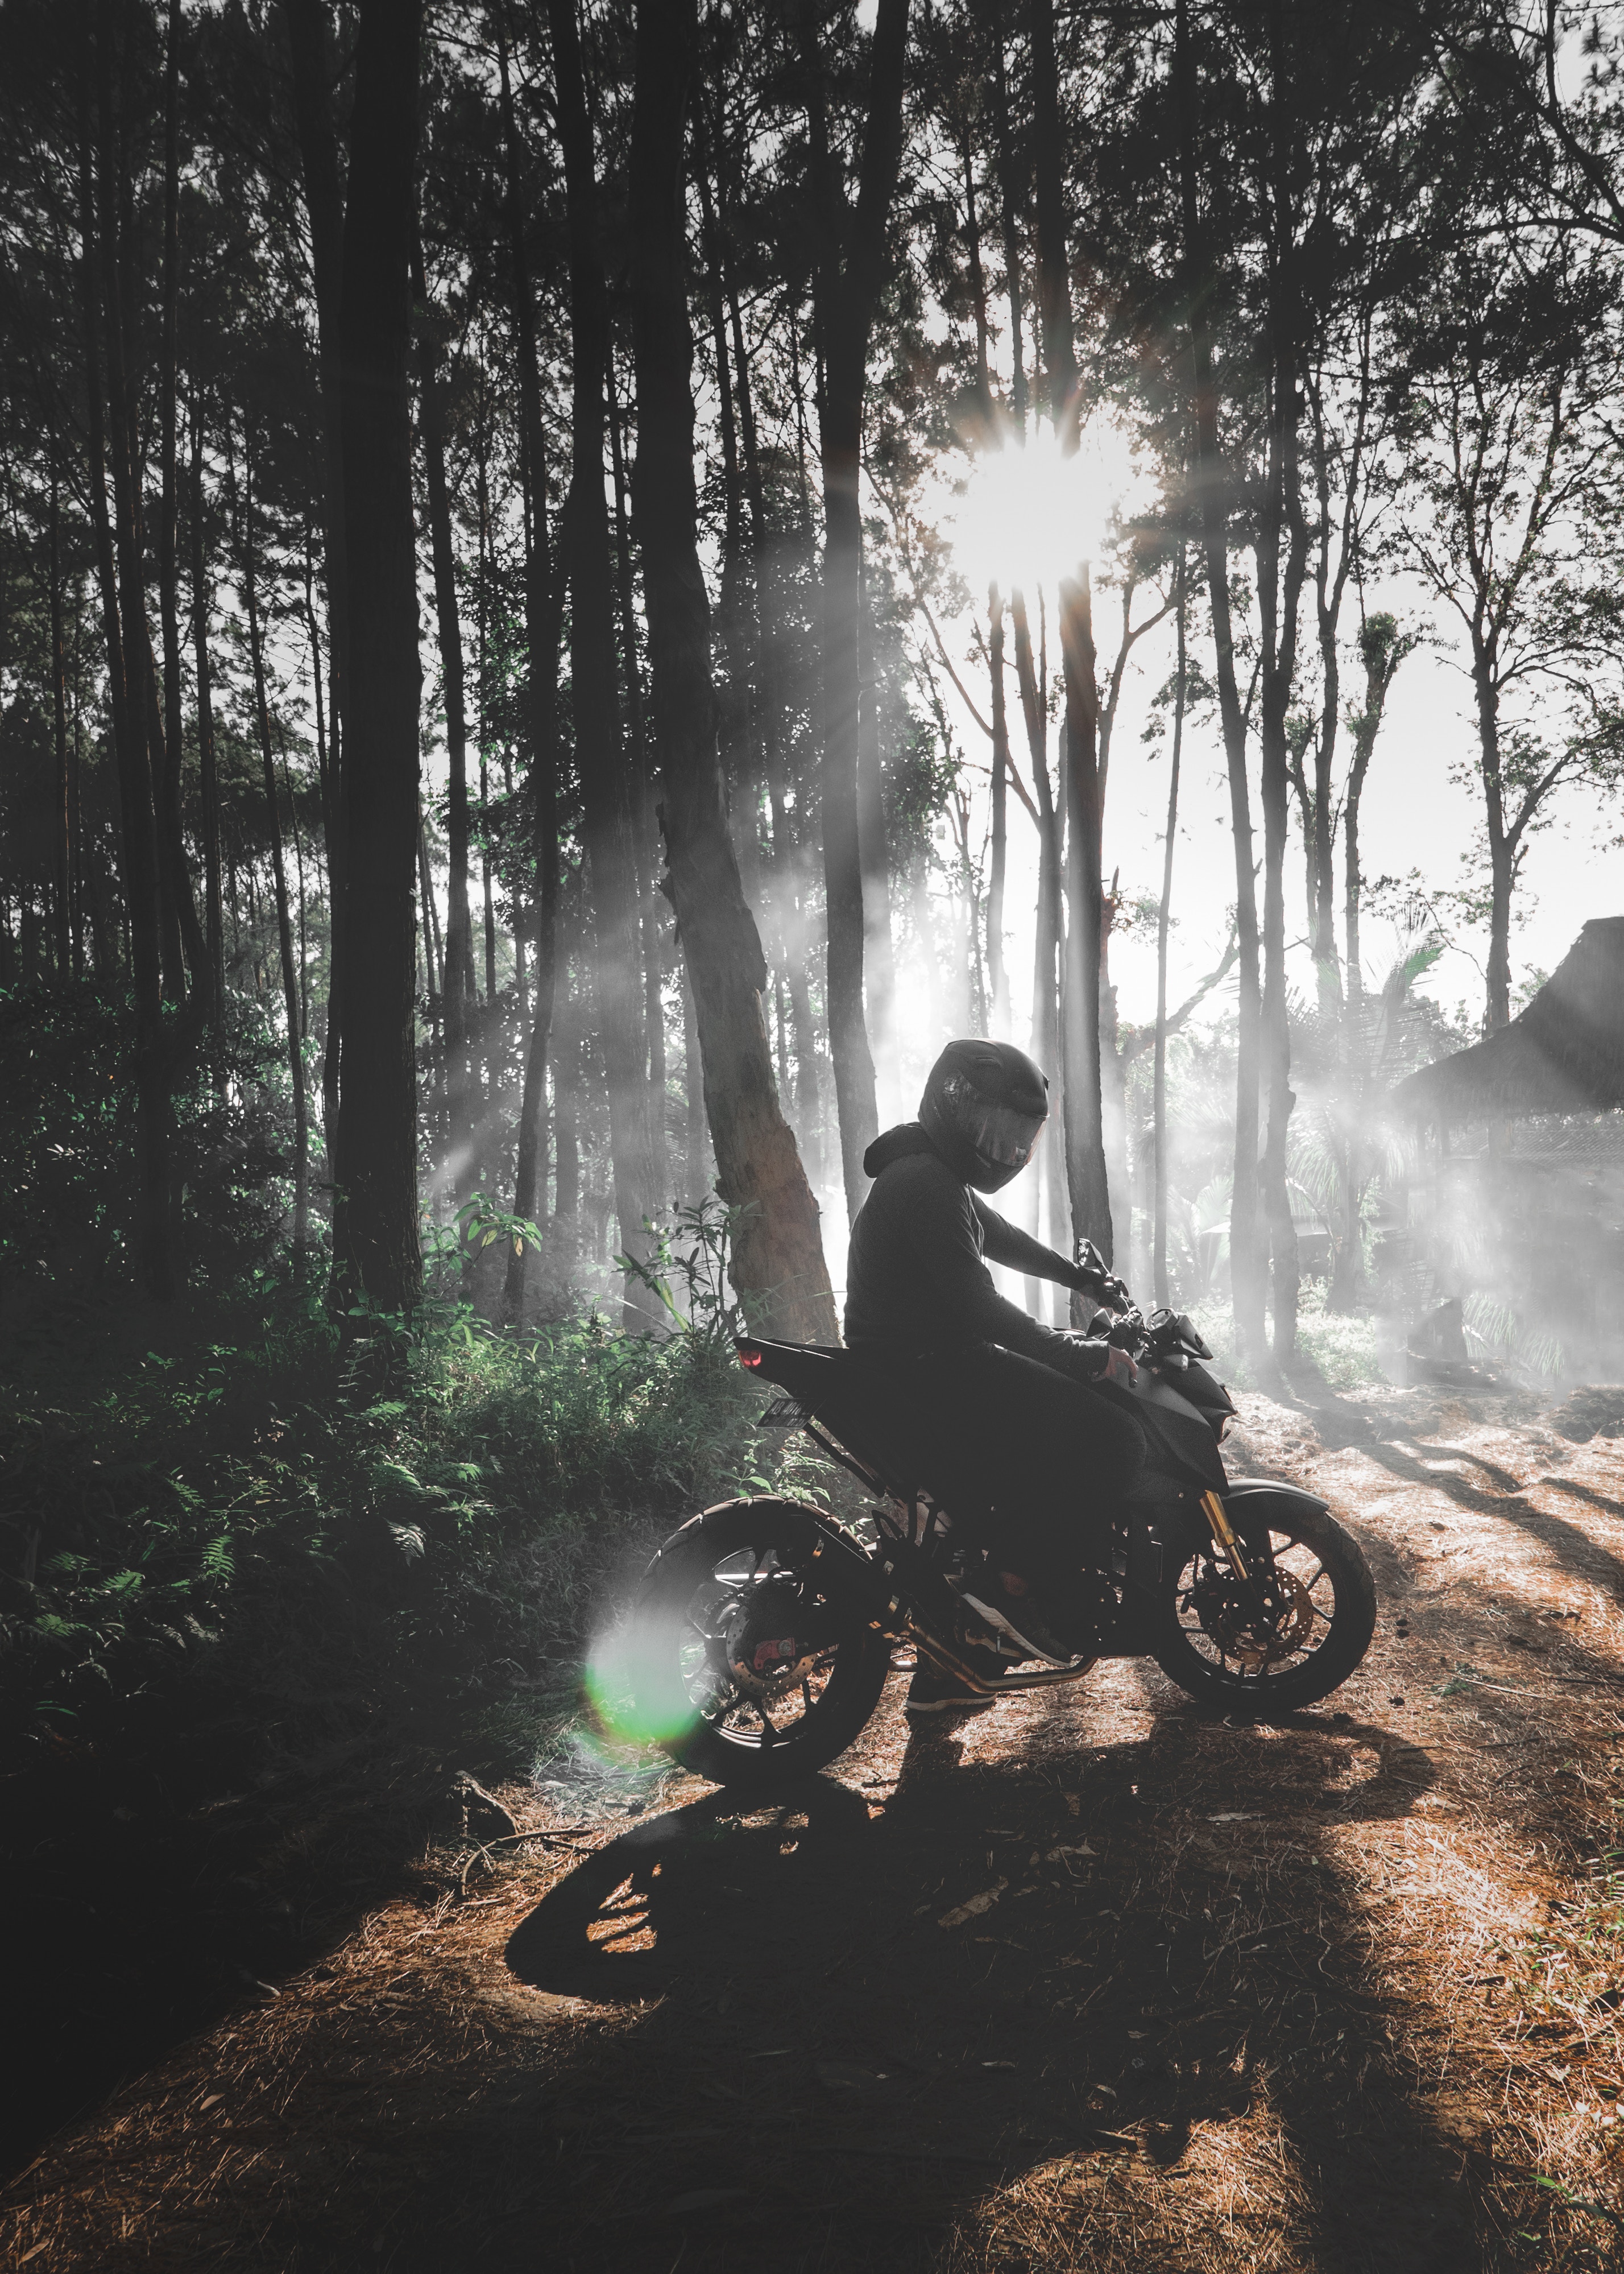 bike, motorcyclist, motorcycles, forest, fog, motorcycle